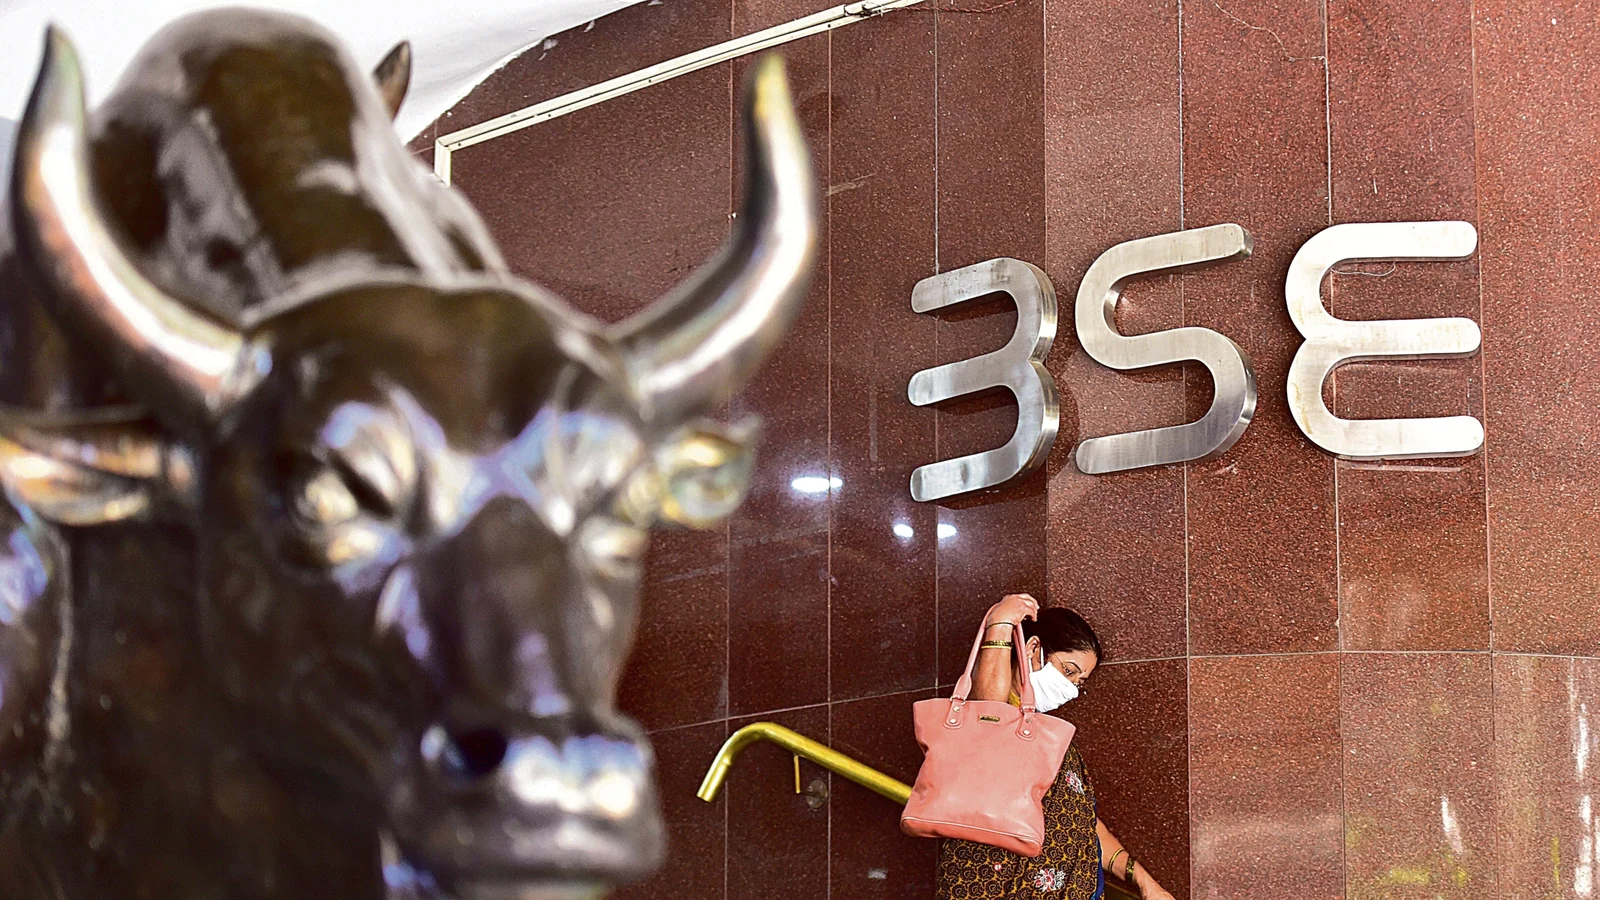 Sensex drops by 566 points to end day at 59,610, Nifty closes at 17,798